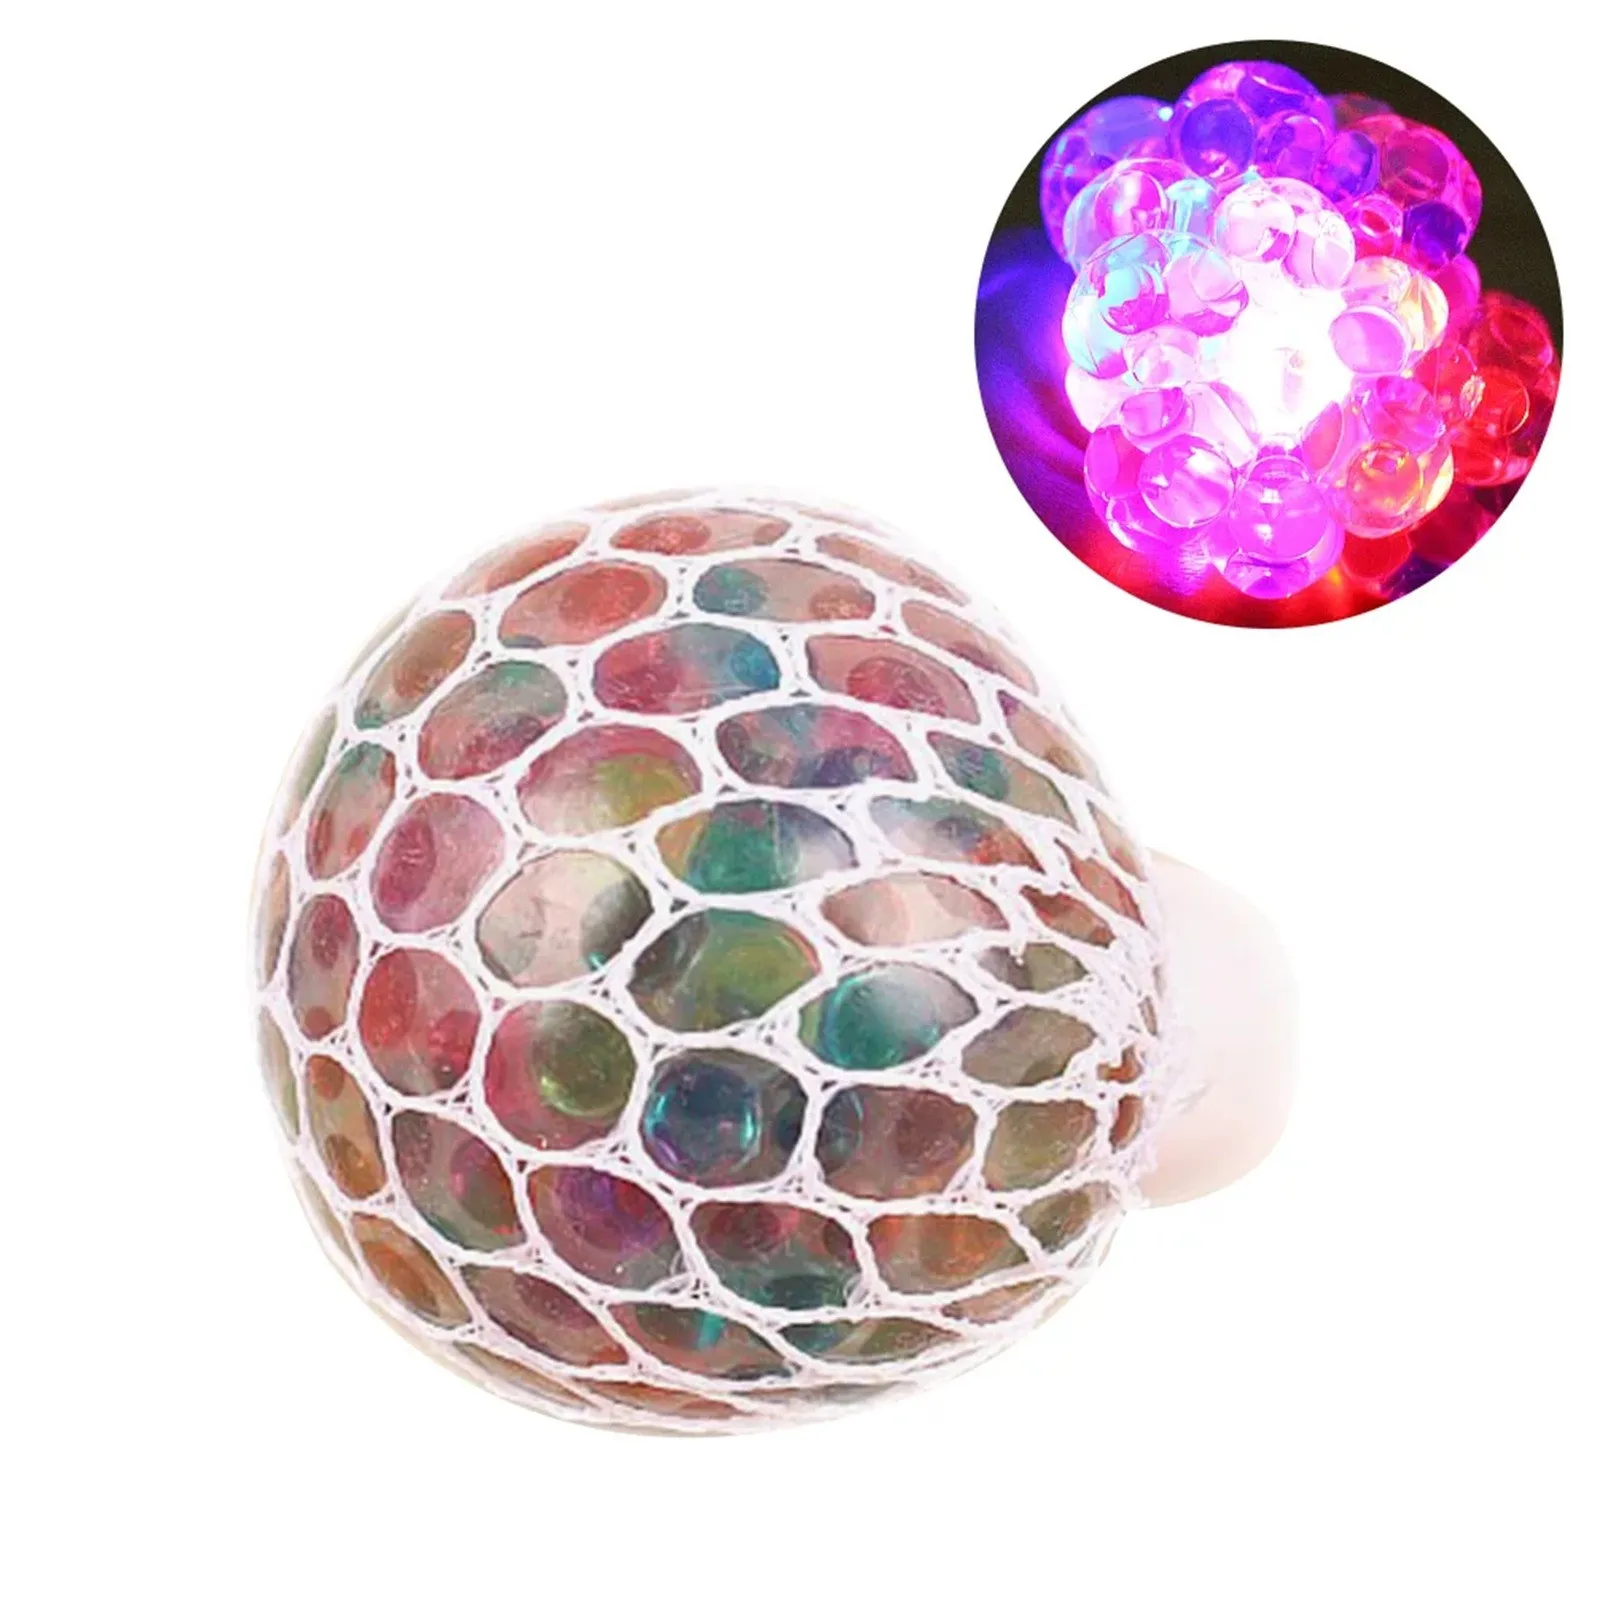 

Soft Squishy Mesh Grape Ball Stop Stress Antistress Reliever Autism Mood Squeeze Relief Fidgets Geek Gadget Beads Vent Toy